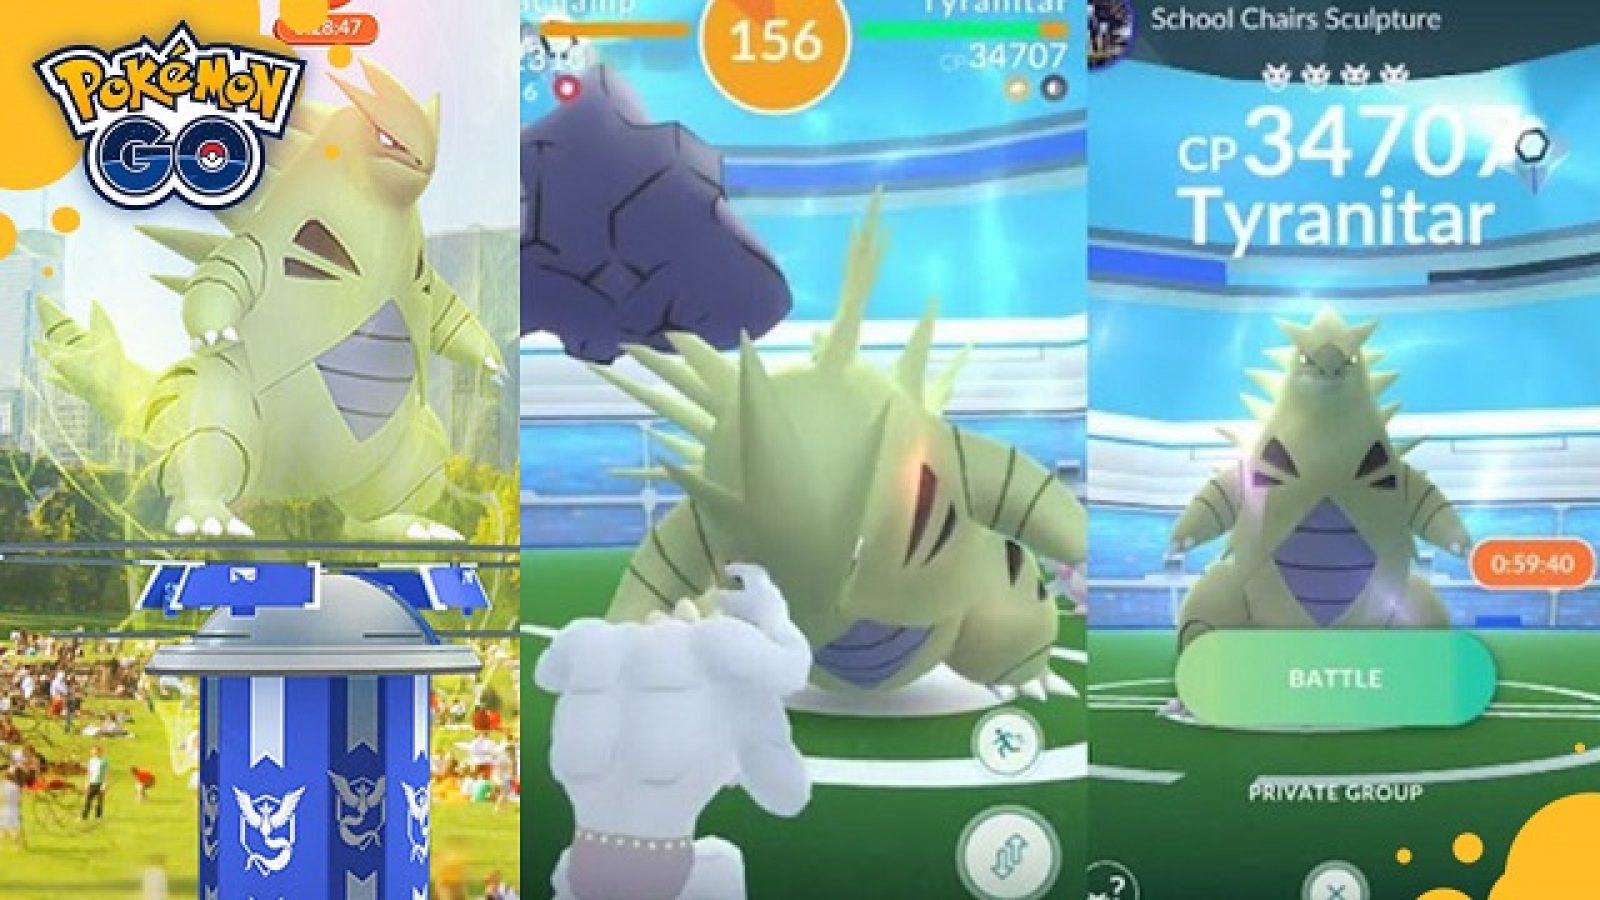 Pokémon Go players are begging to see these 5 Pokémon at Go Tour